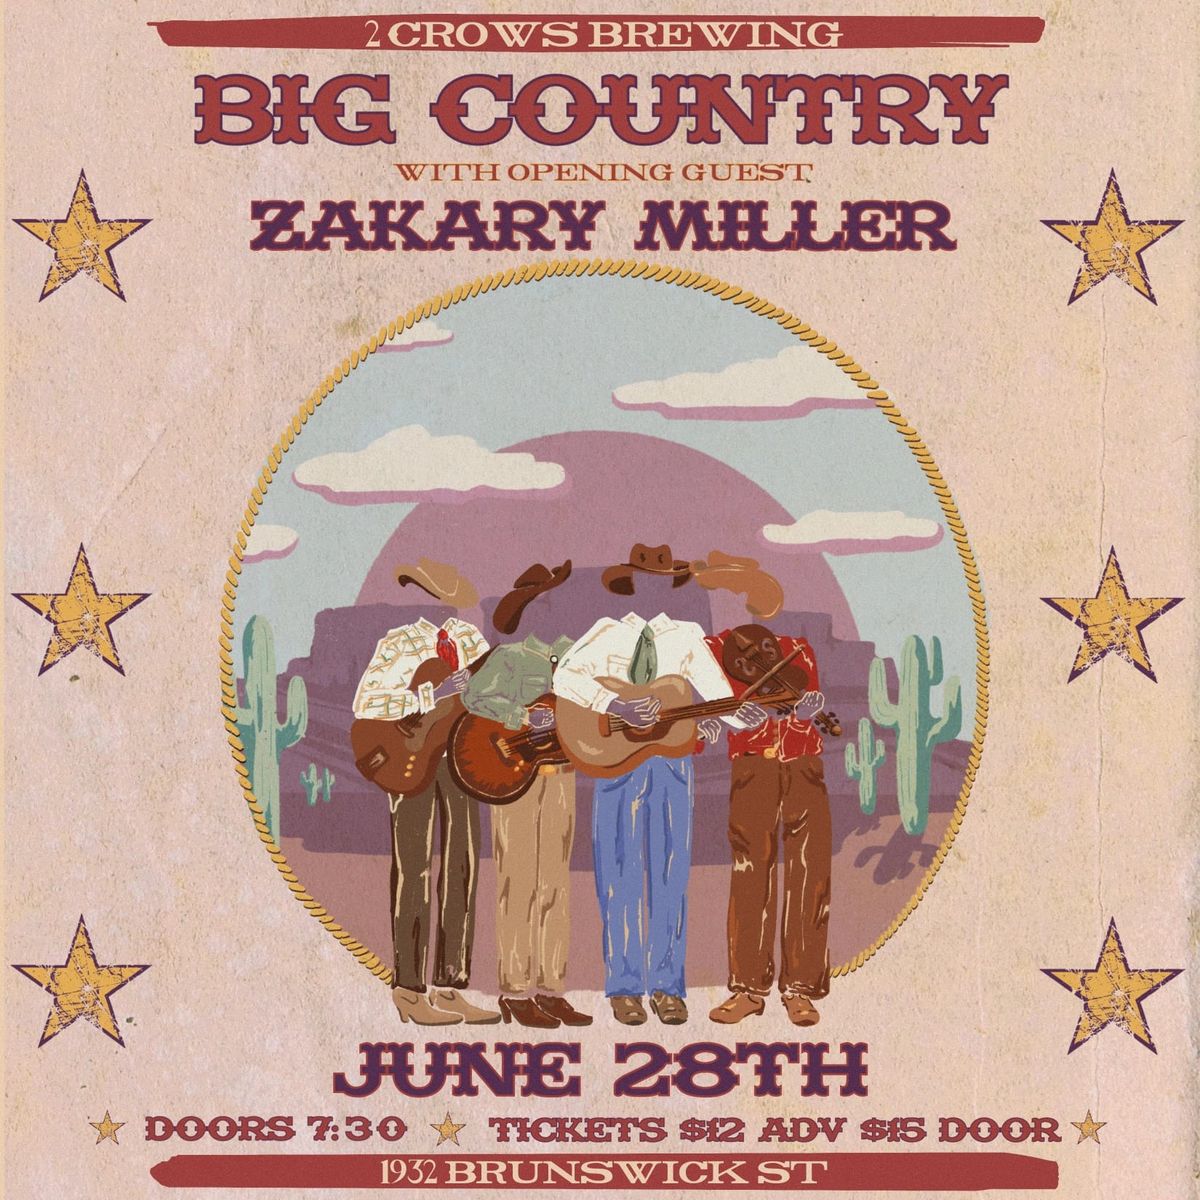 Big Country \/\/ Zakary Miller at 2 Crows Brewing